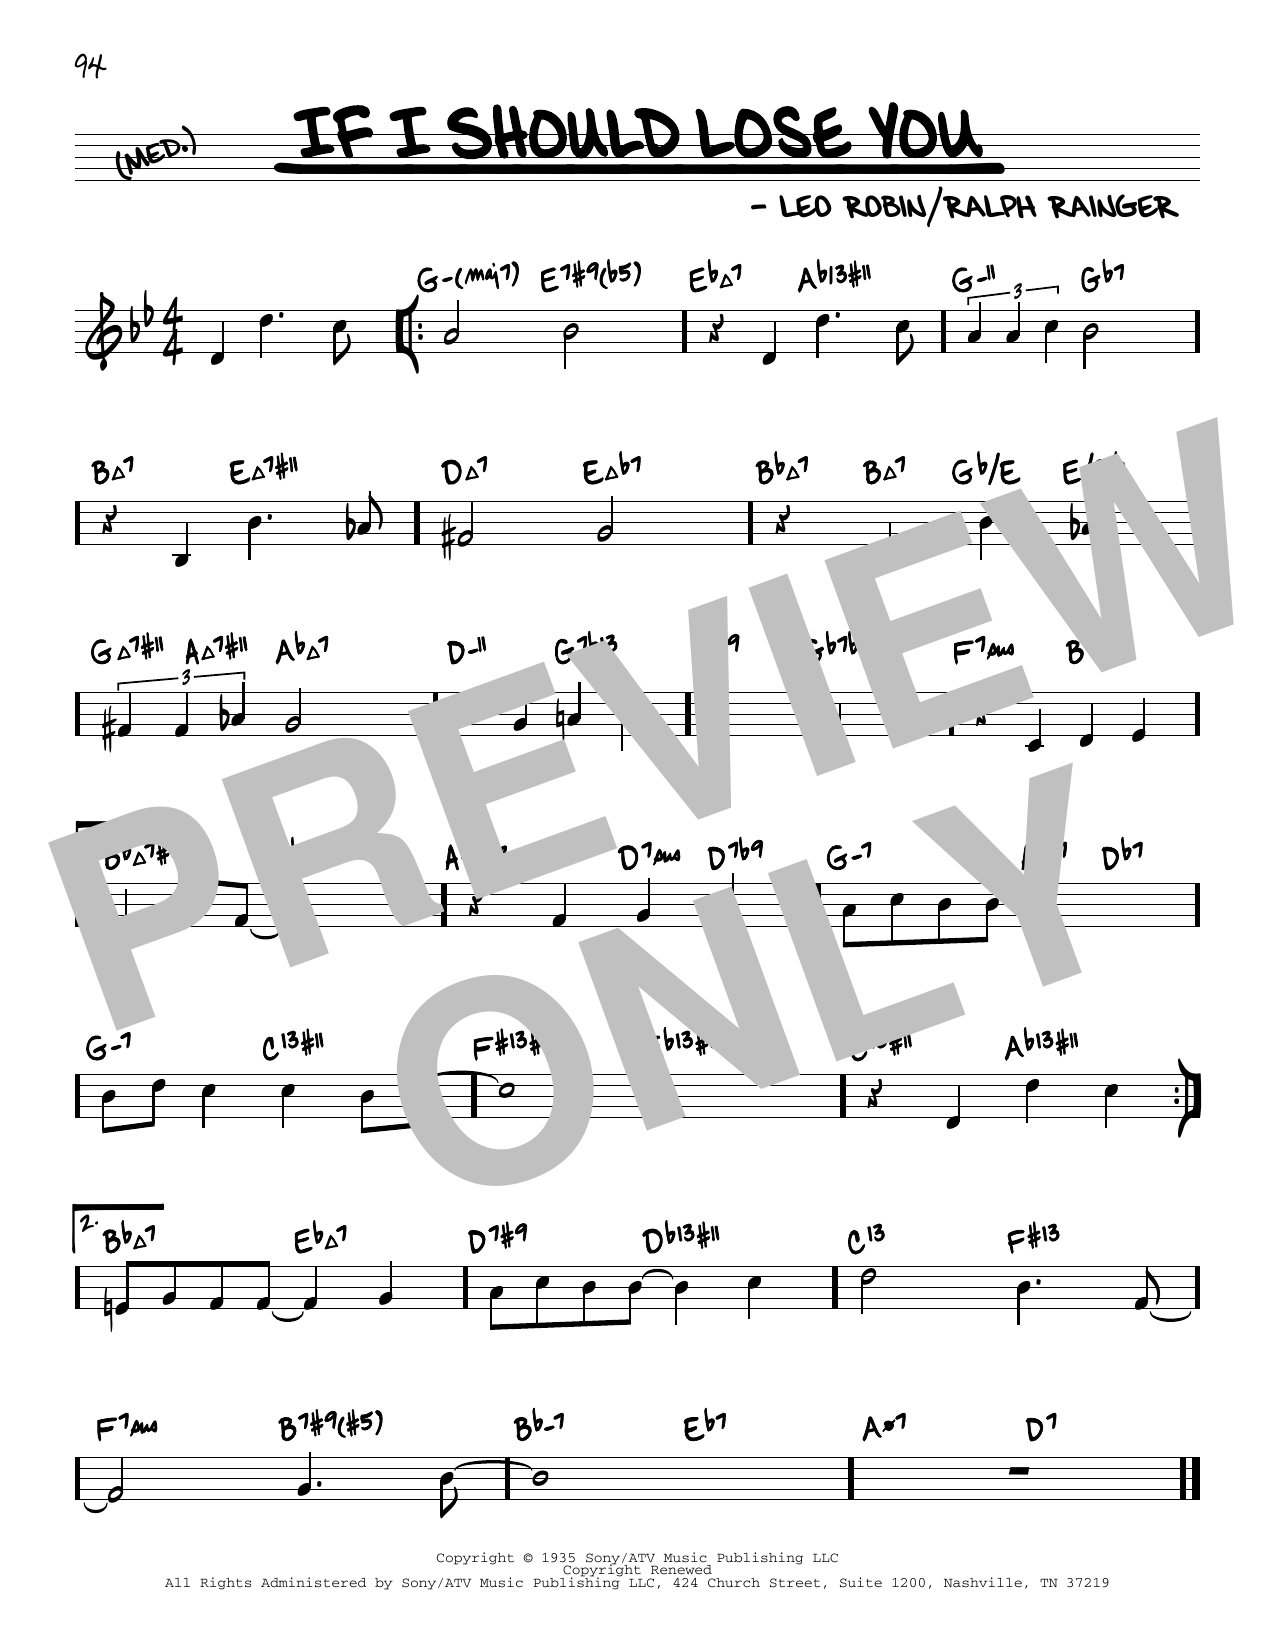 Leo Robin If I Should Lose You sheet music notes and chords. Download Printable PDF.